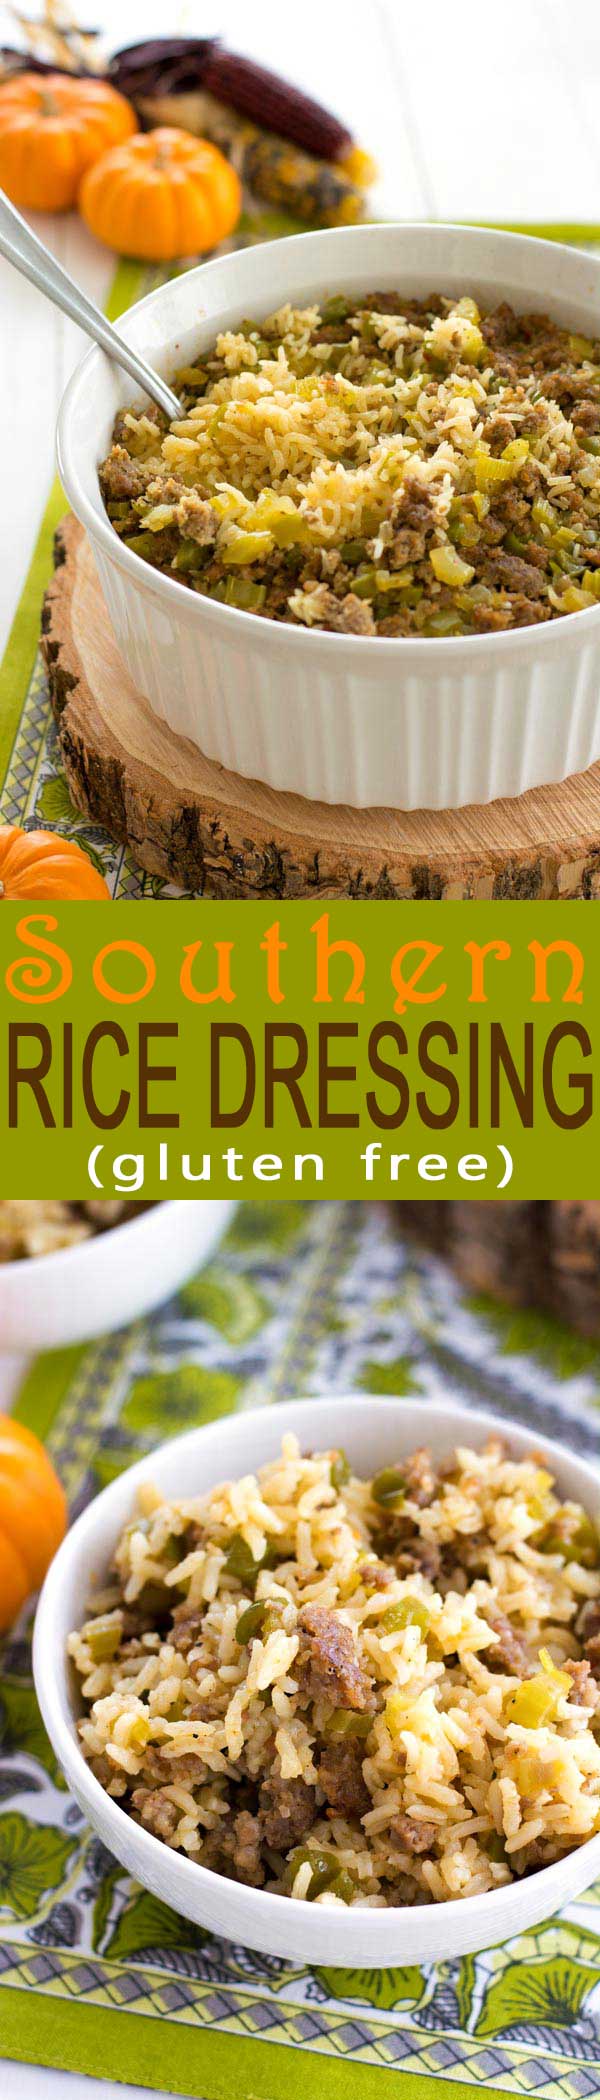 Try this easy rice dressing recipe baked with the traditional flavors of bread stuffing. Great stuffing alternative for gluten free diets!